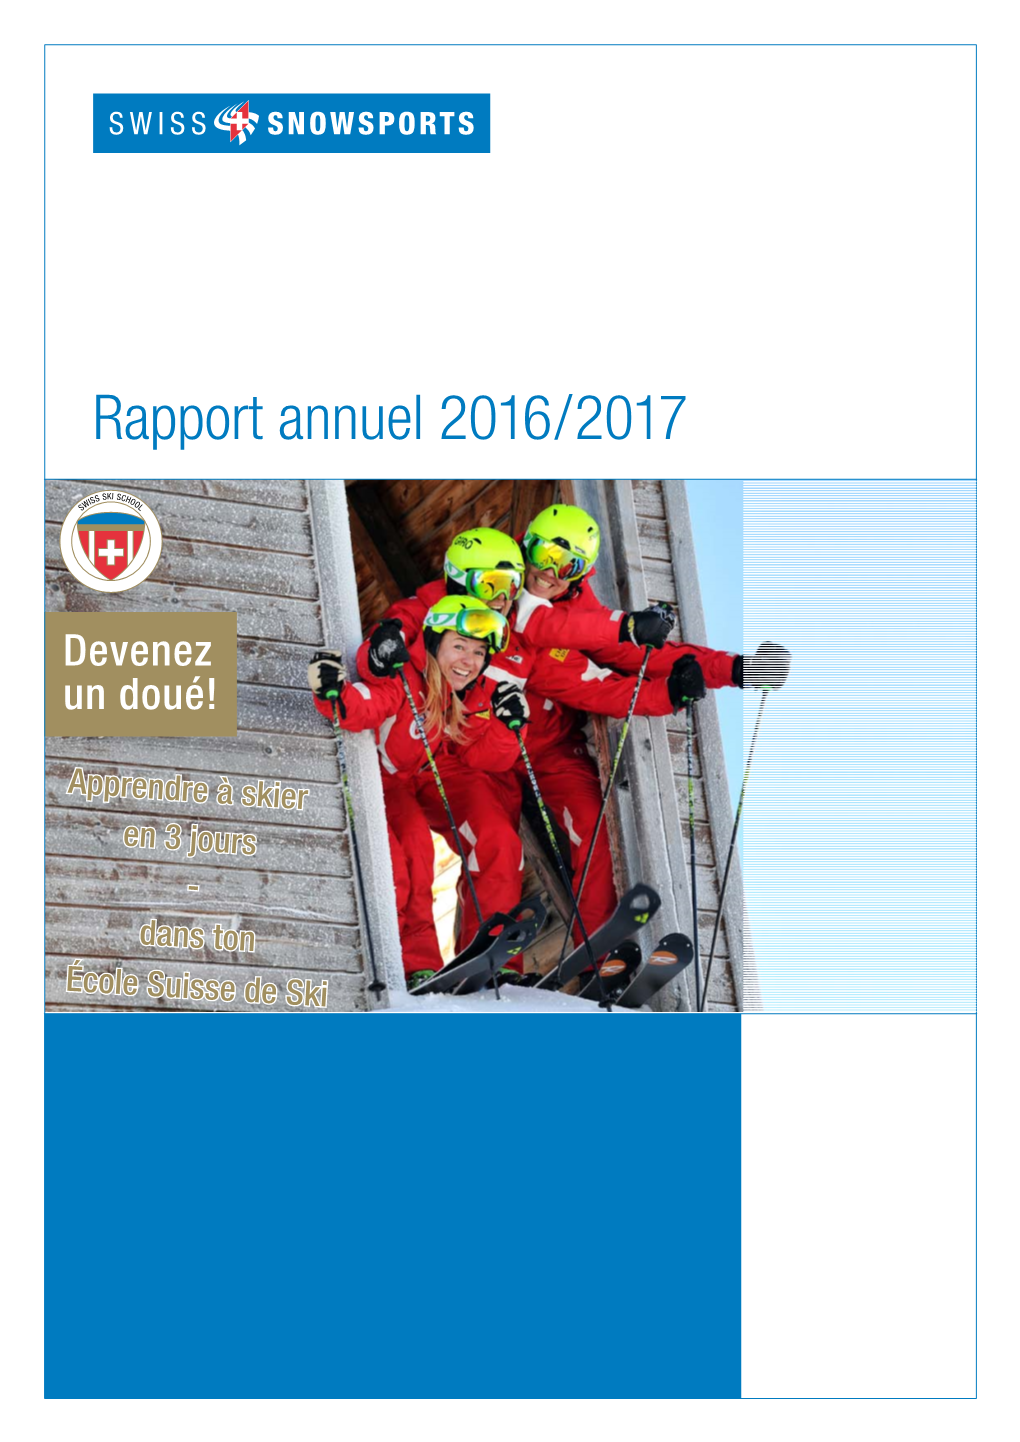 Rapport Annuel 2016 / 2017